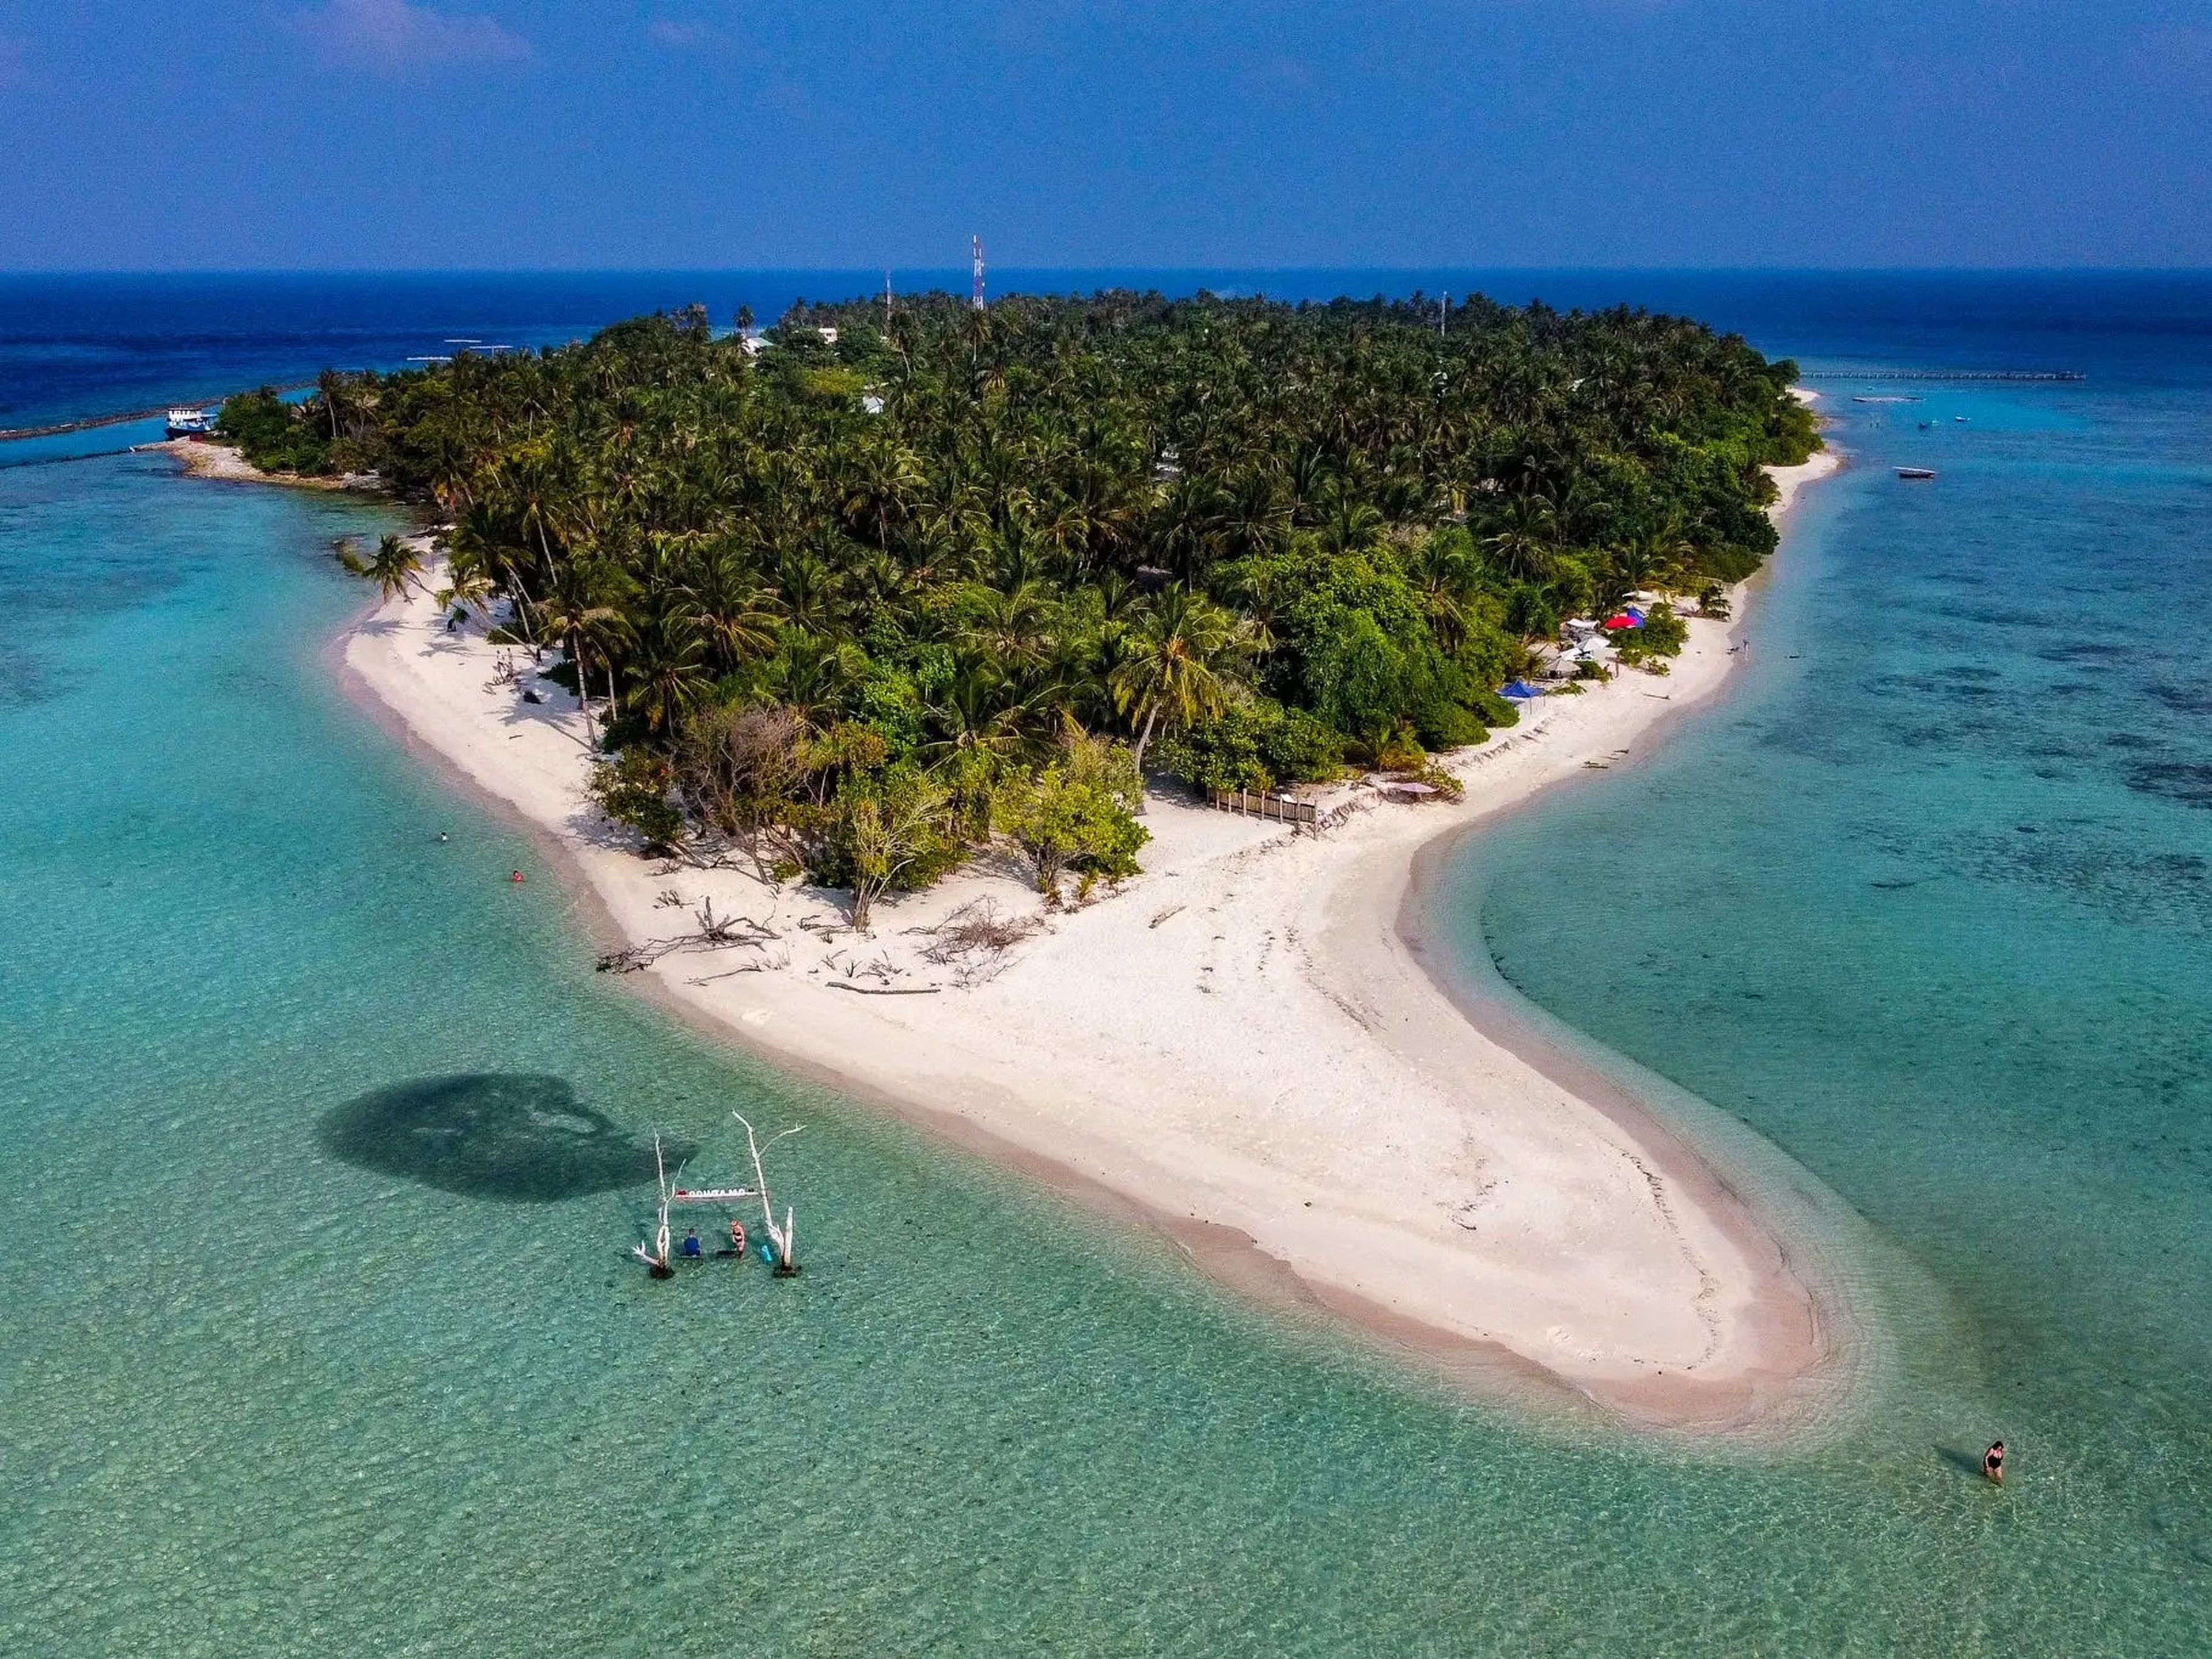 An aerial view of Omadhoo Island, which is covered in lush green trees and surrounded by aqua-blue water.